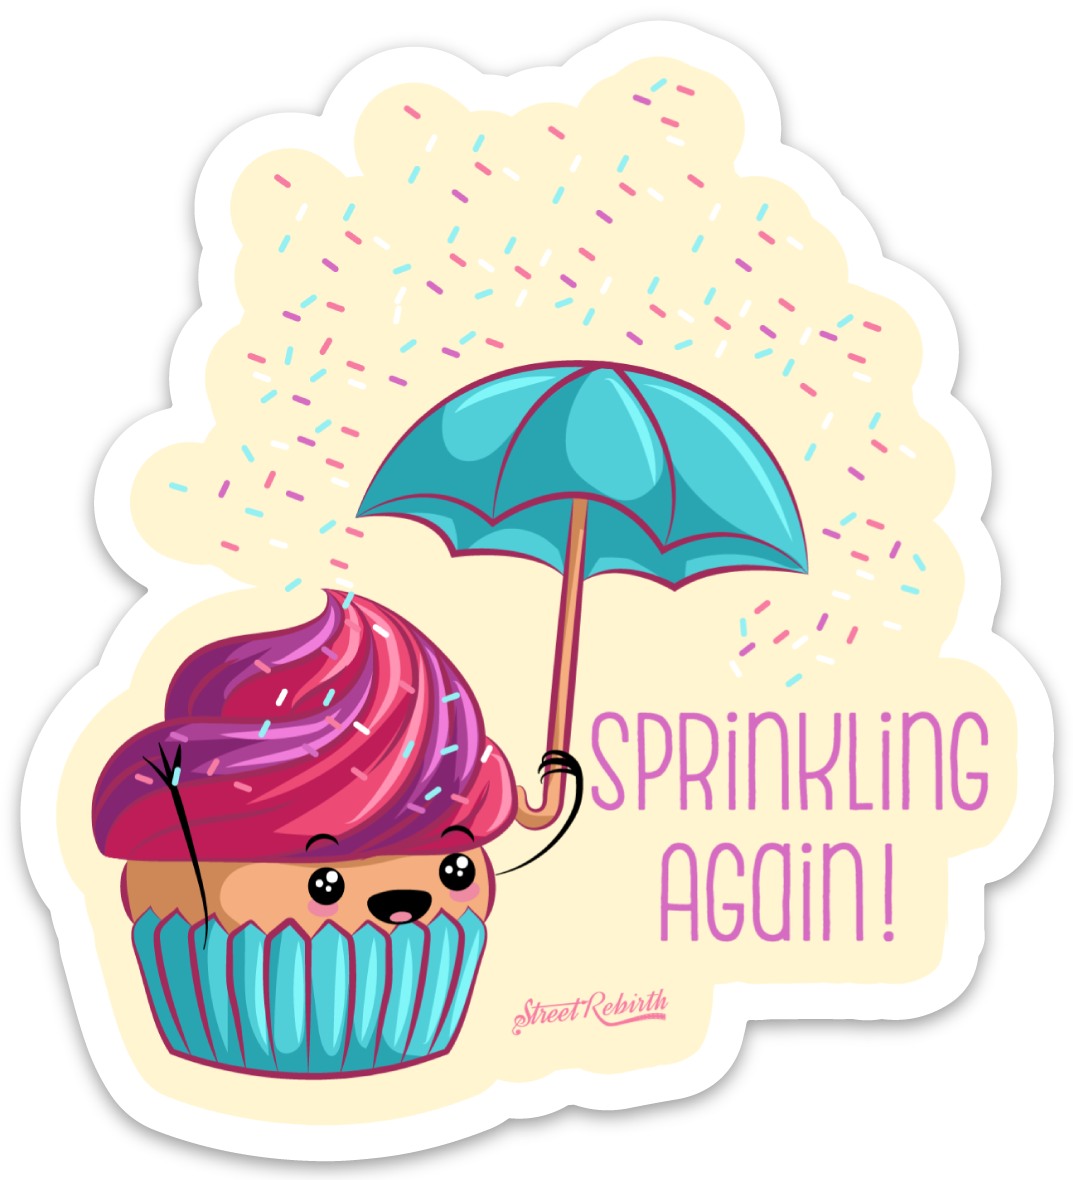 Sprinkling Again! PUN STICKER – ONE 4 INCH WATER PROOF VINYL STICKER – FOR HYDRO FLASK, SKATEBOARD, LAPTOP, PLANNER, CAR, COLLECTING, GIFTING